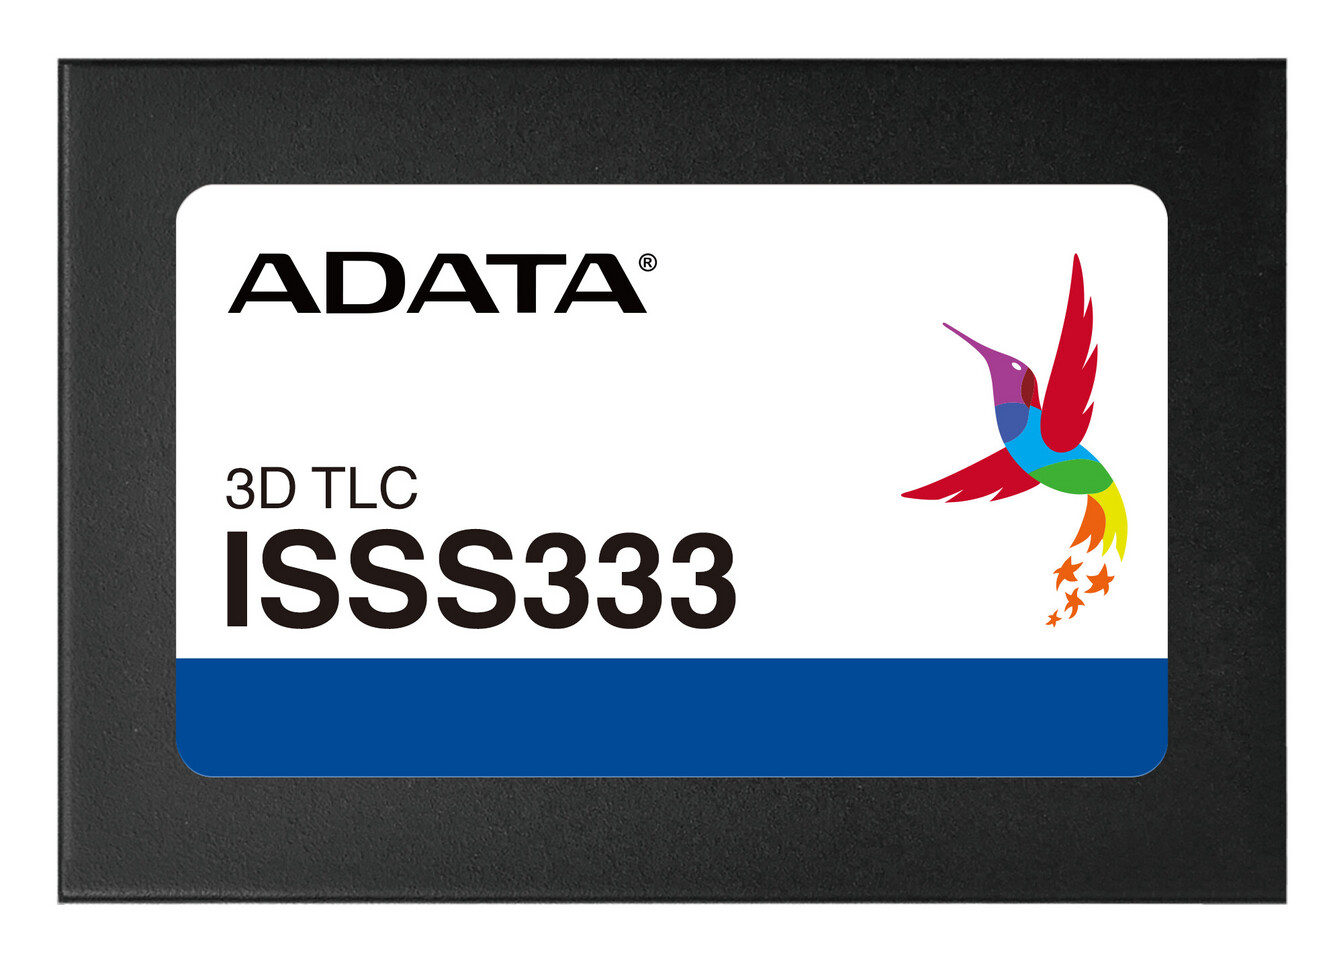 ADATA Launches ISSS333 Solid with Power Loss Protection | TechPowerUp